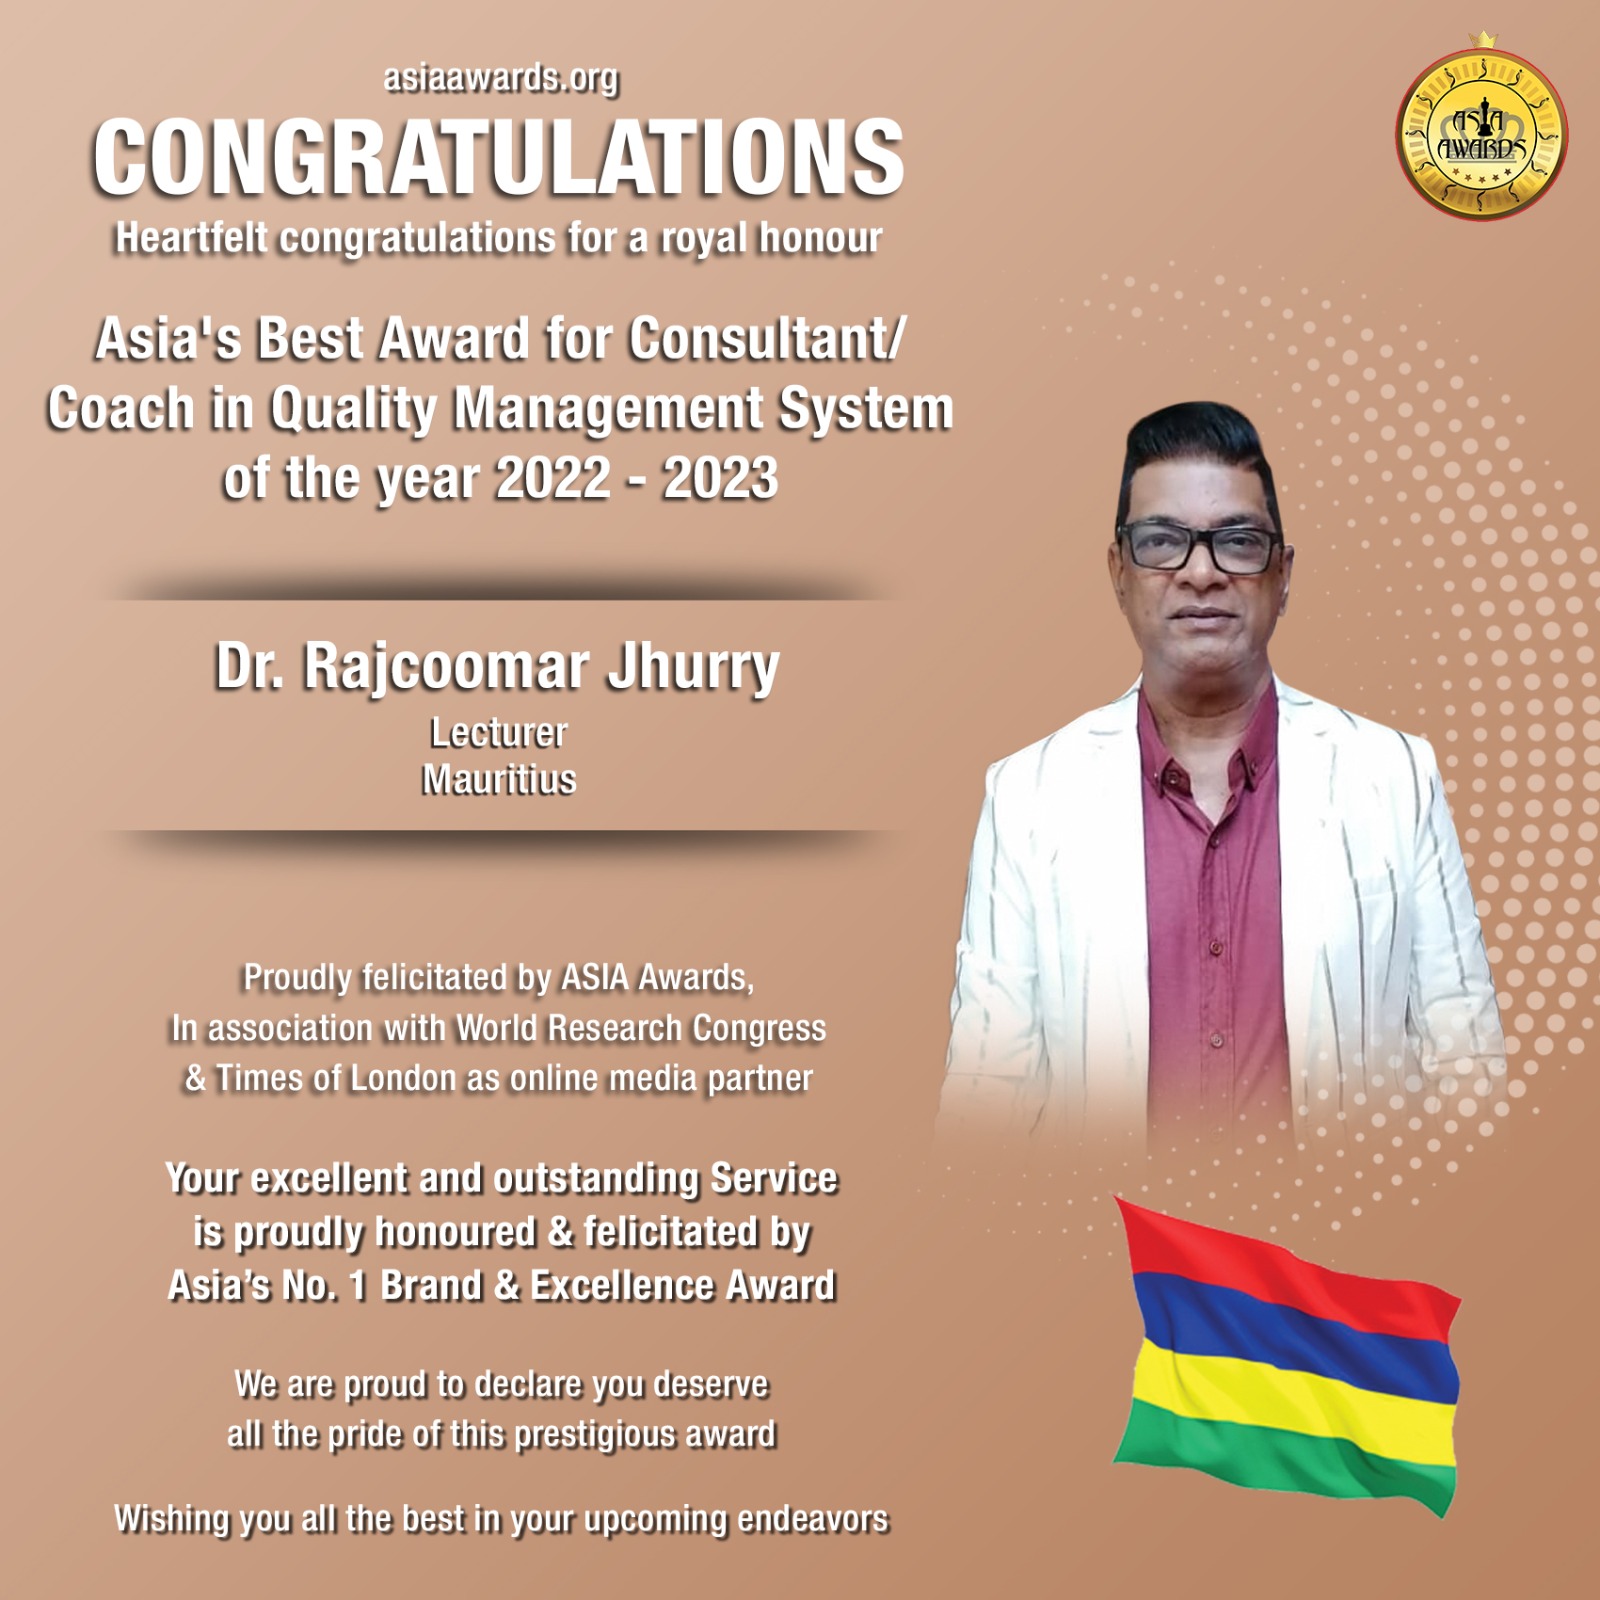 Dr Rajcoomar Jhurry Has bagged Asia's Best Award for Consultant and Coach in Quality Management System